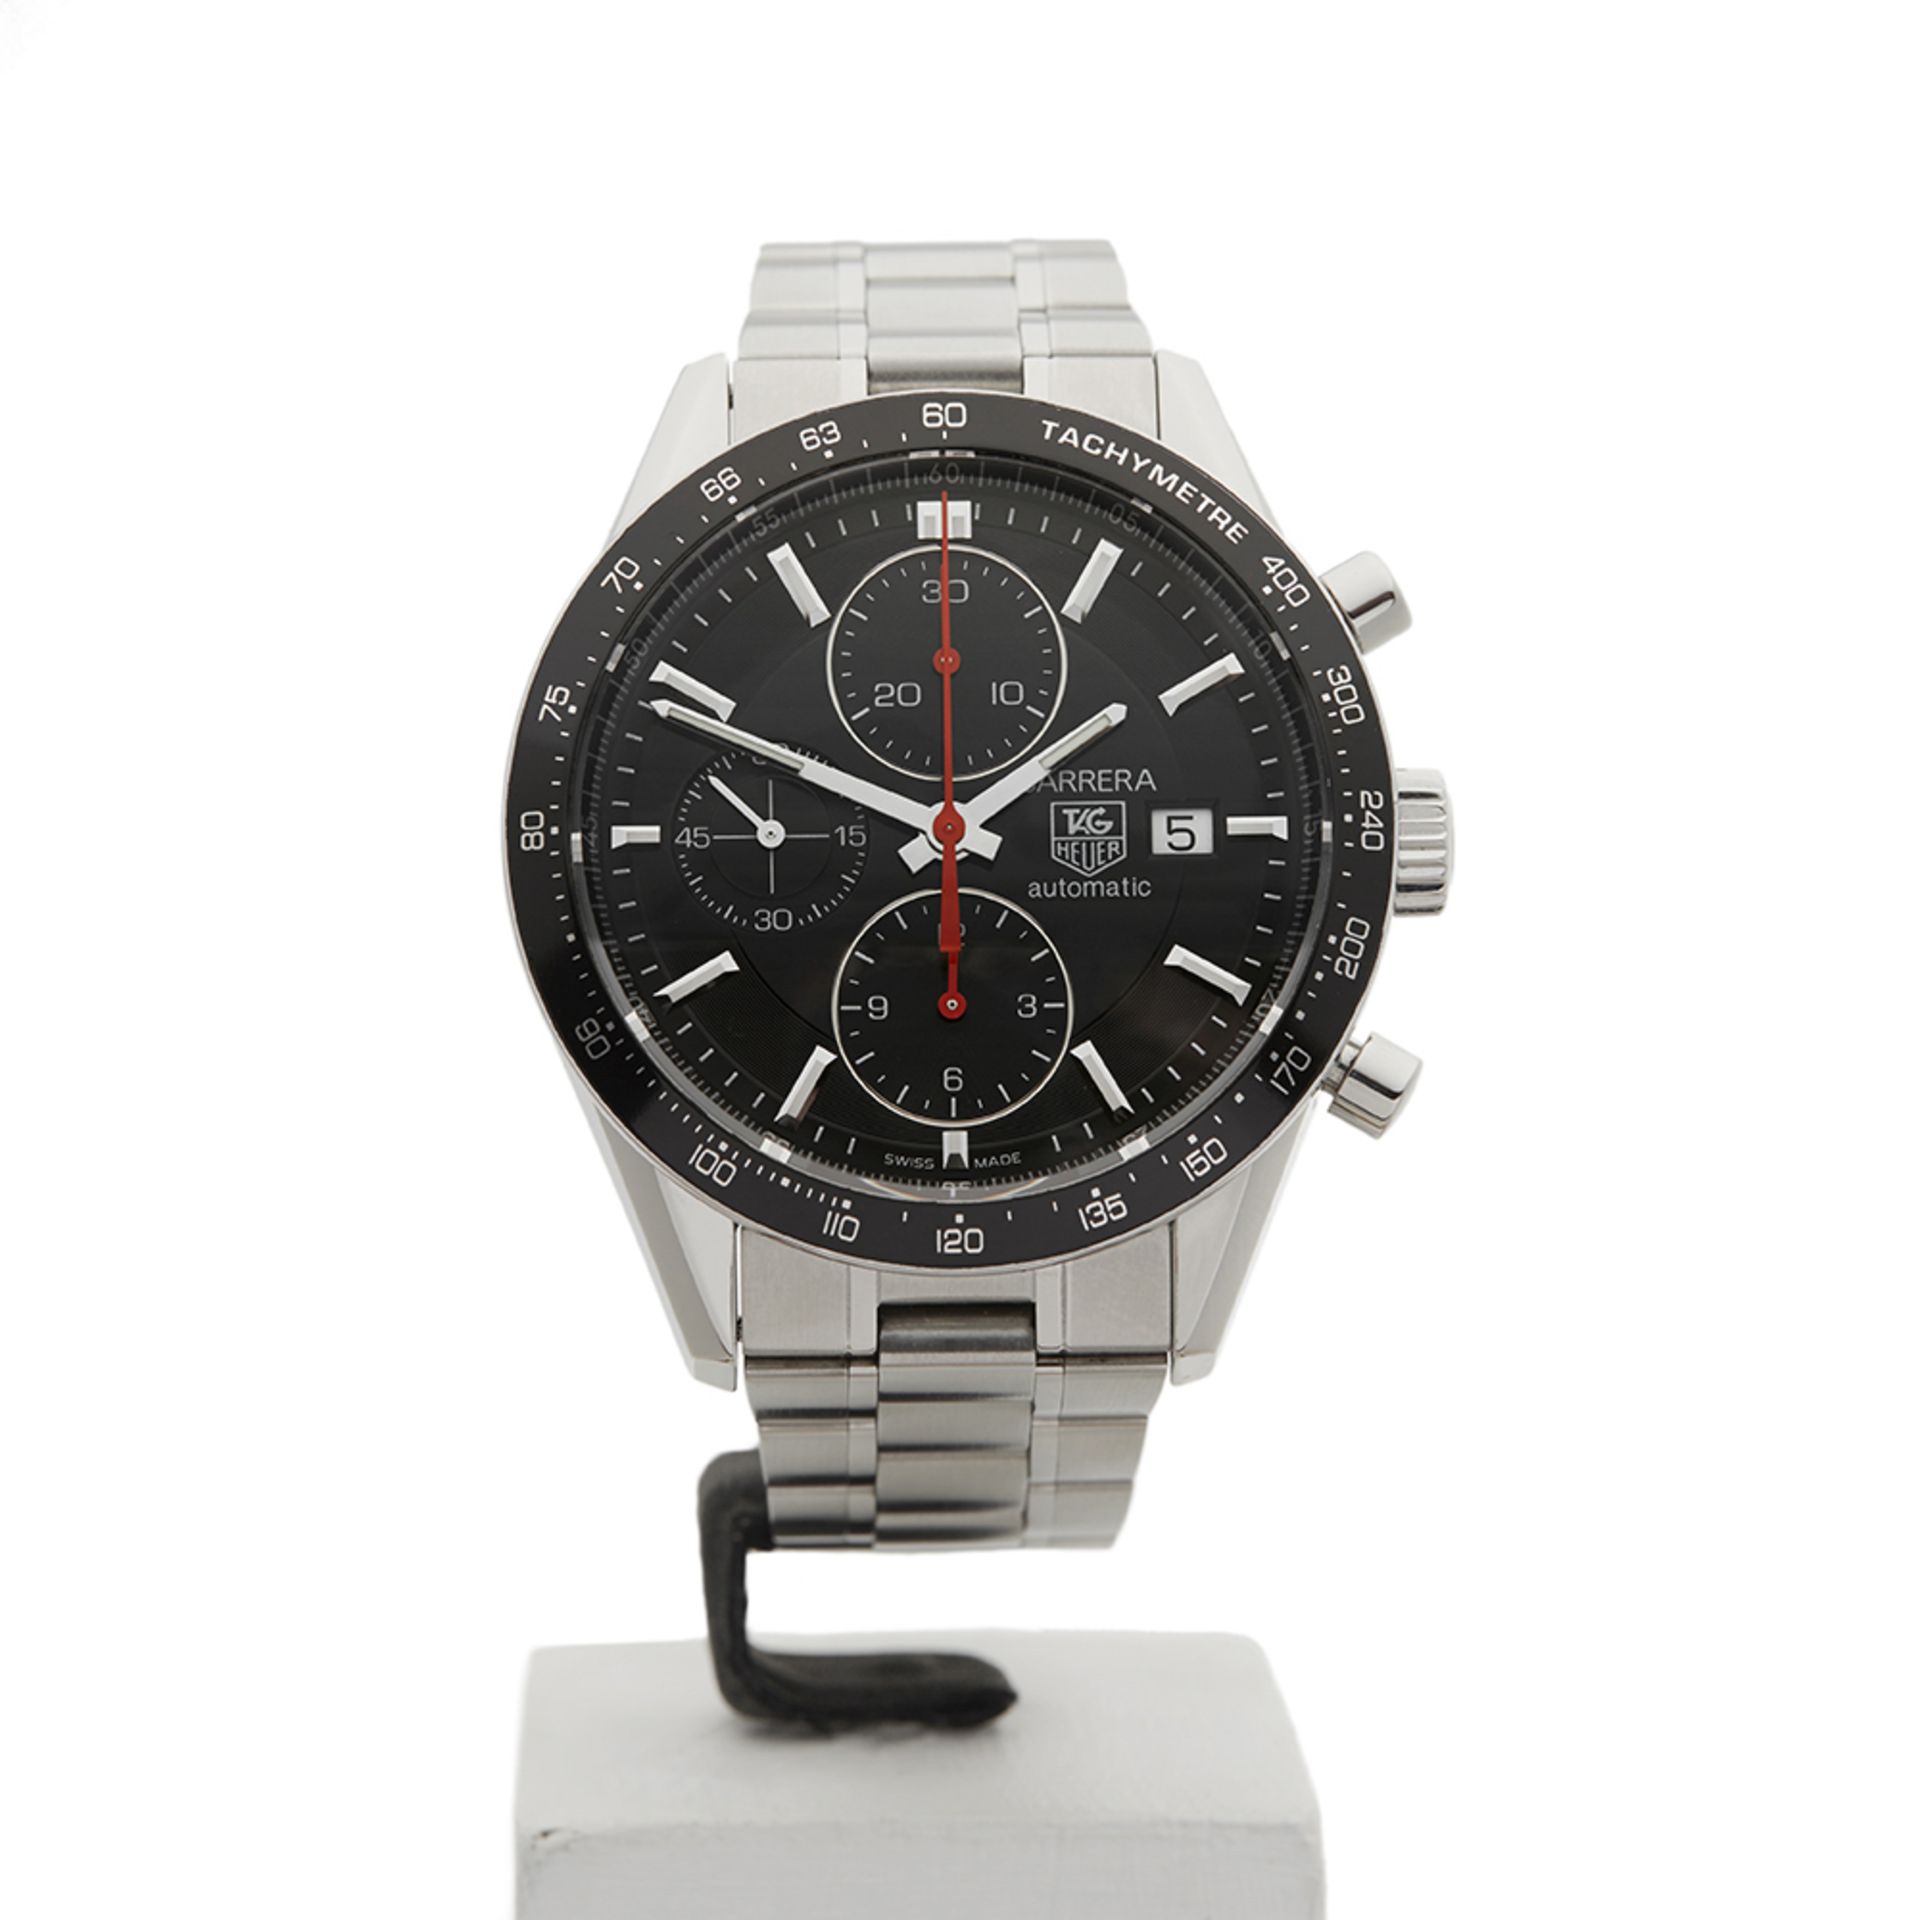 Tag Heuer Carrera Chronograph 41mm Stainless Steel - CV2014.BA0794 - Image 2 of 8